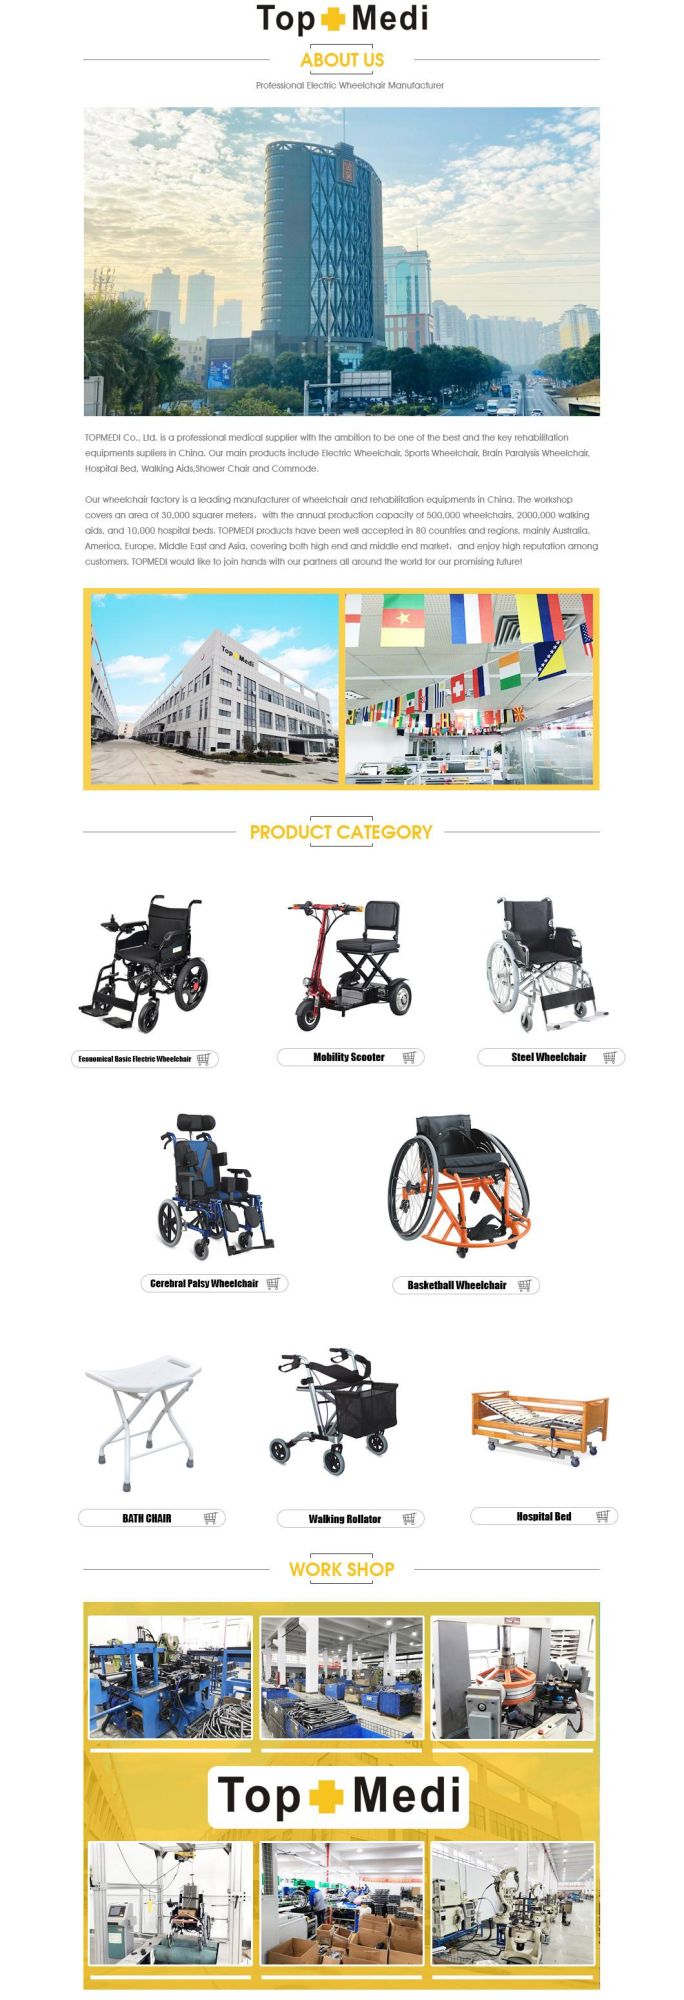 Funtional Electric Wheelchair for Adult with CE Tew002la